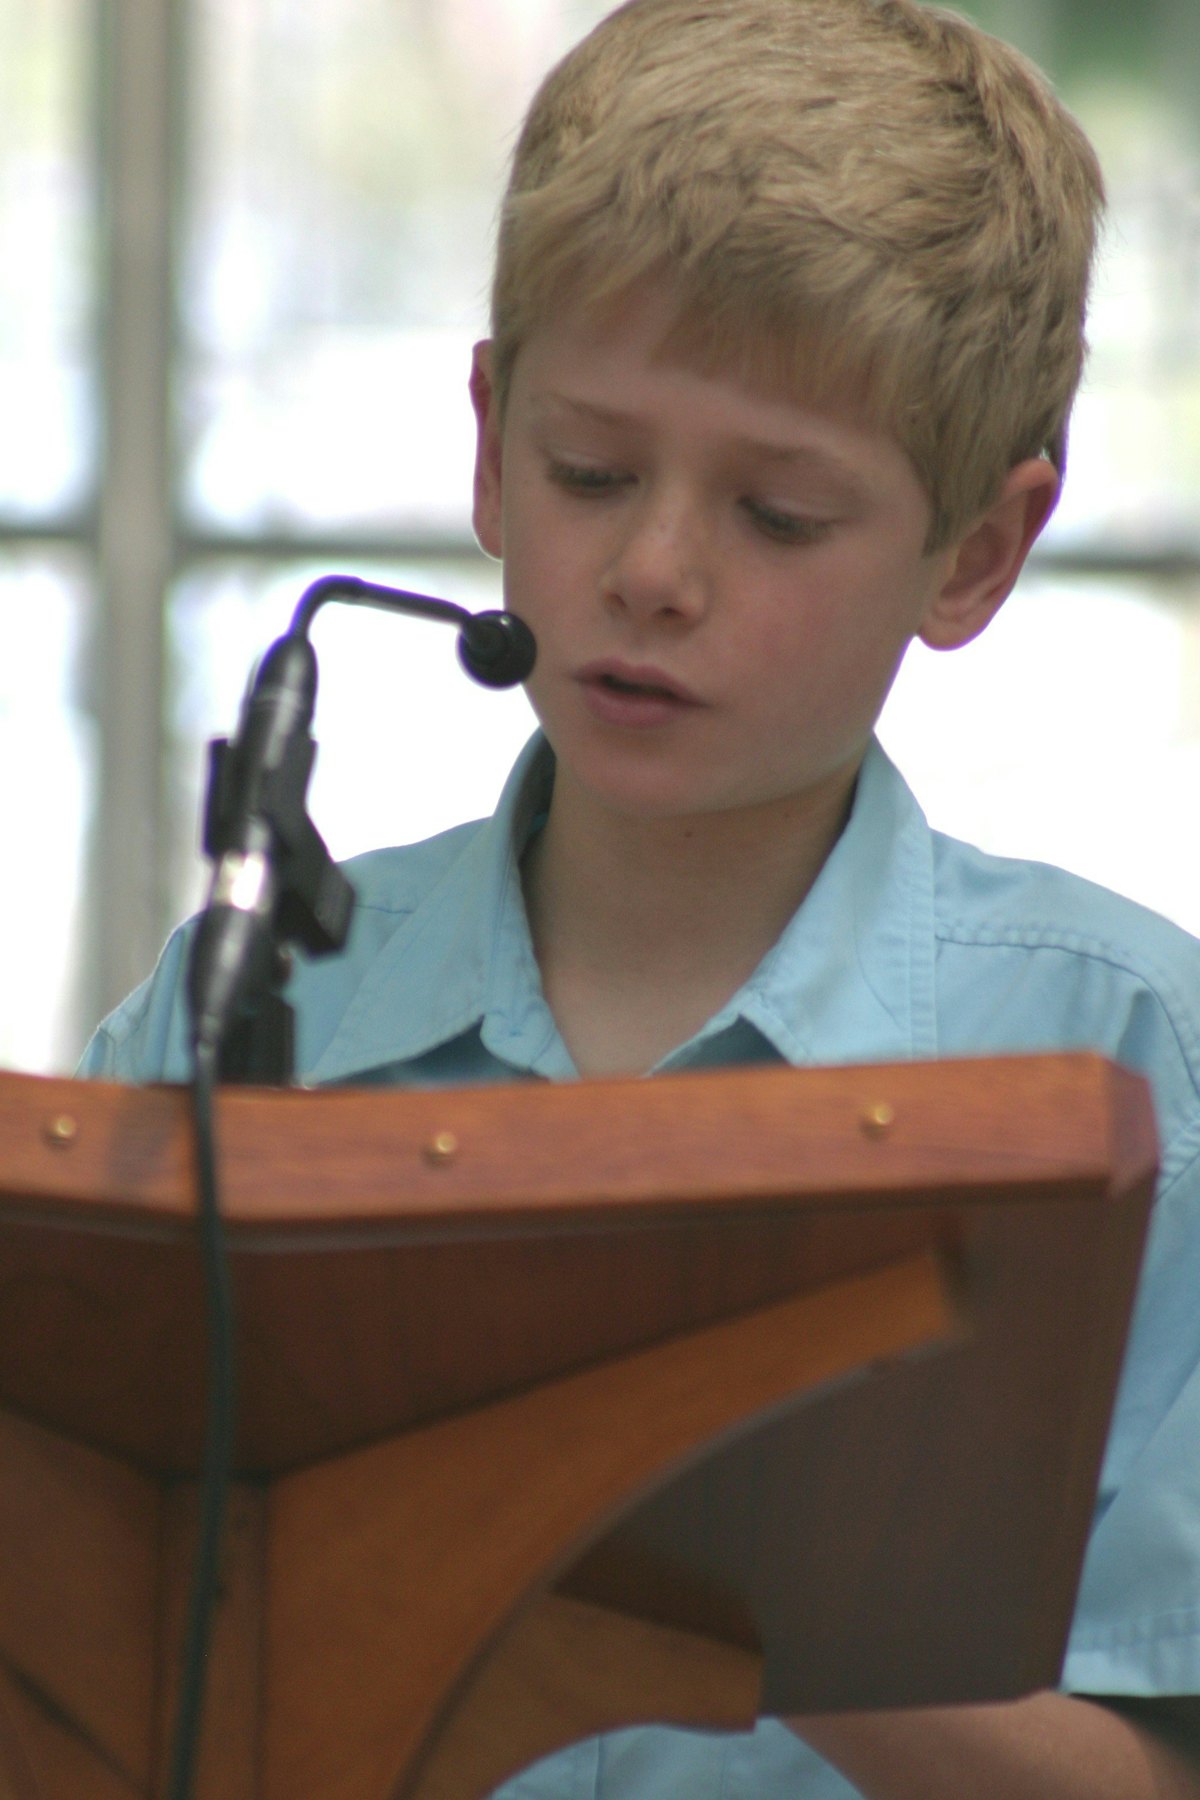 One of the readers at the children's service at the Baha'i Temple in Sydney, Lachlan Bartrop, of Beecroft Public School.